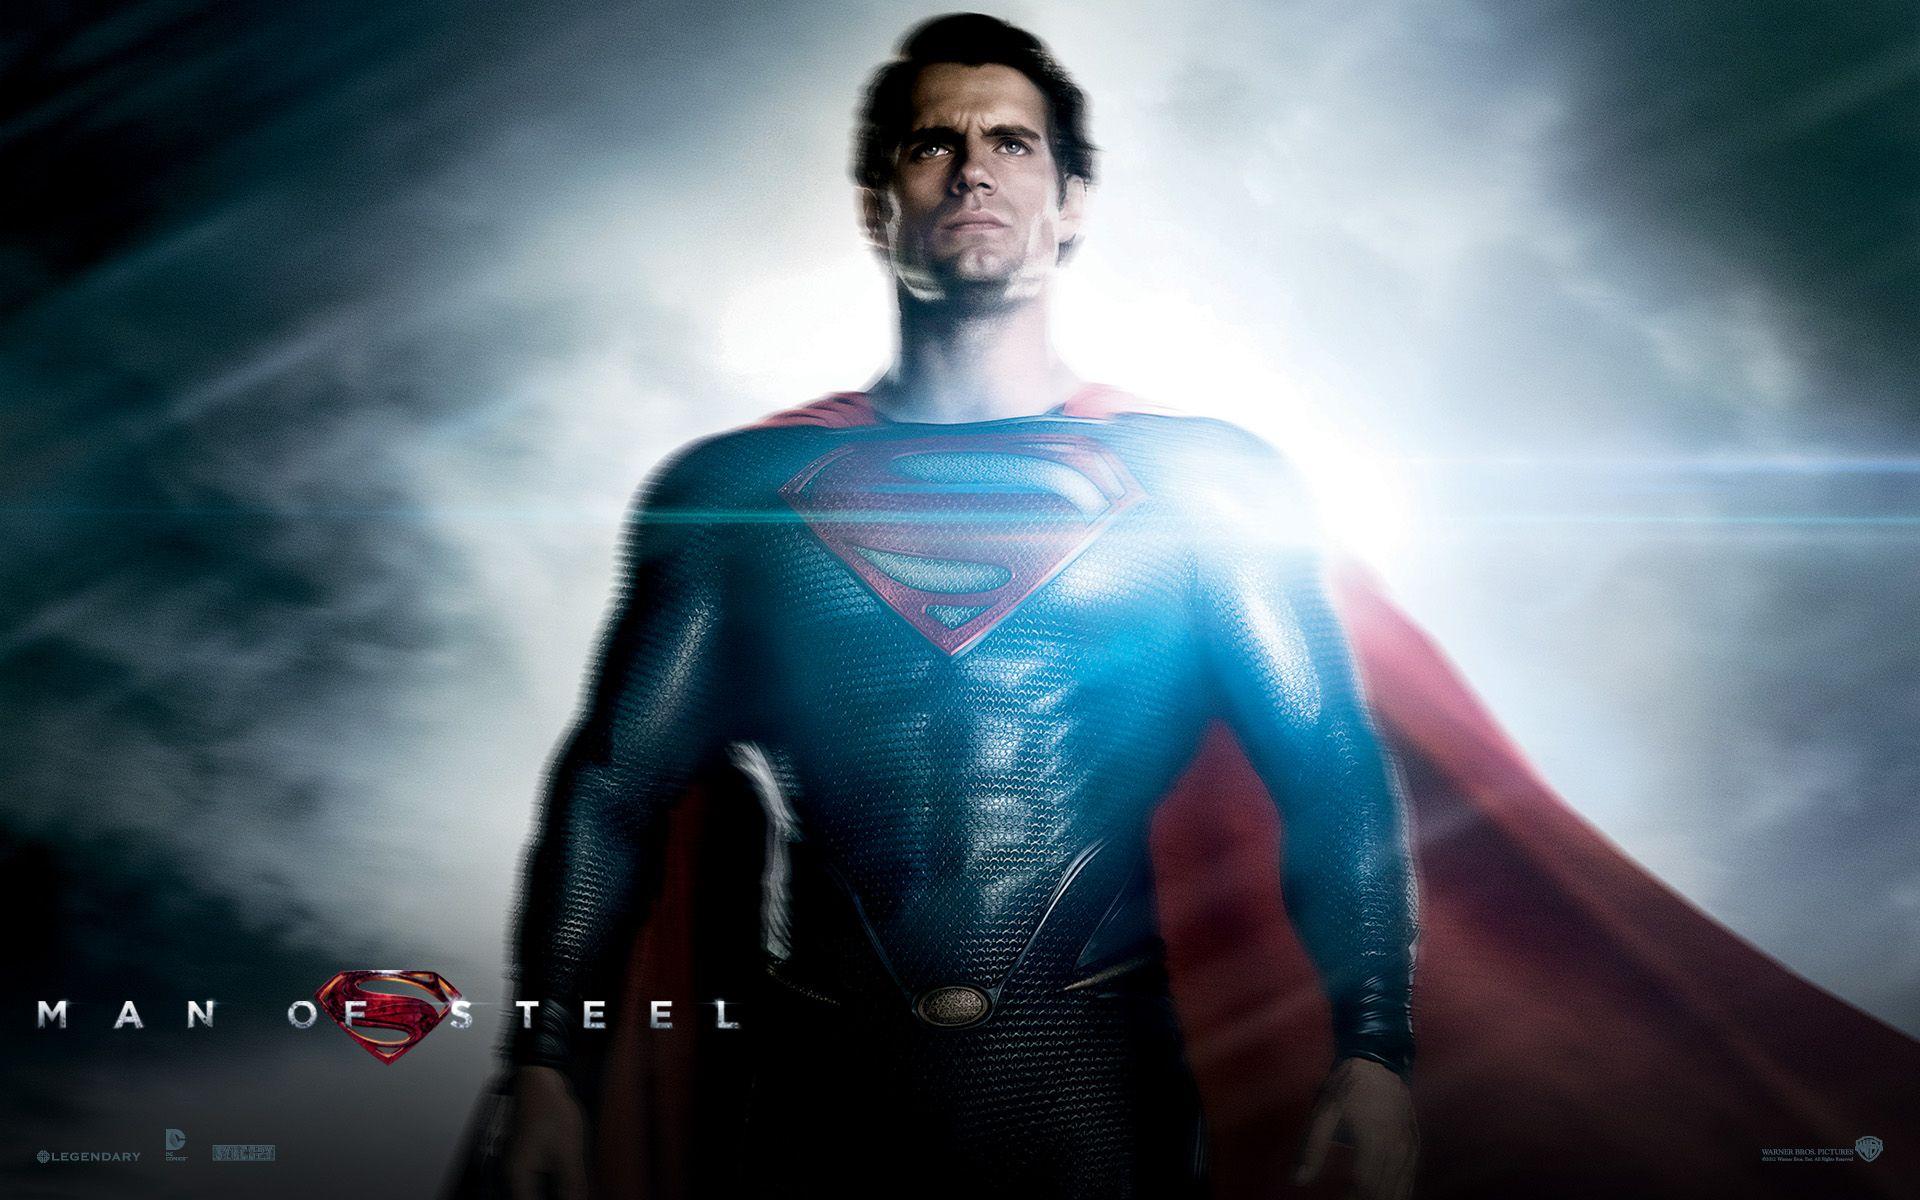 Man Of Steel. Free Desktop Wallpaper for Widescreen, HD and Mobile